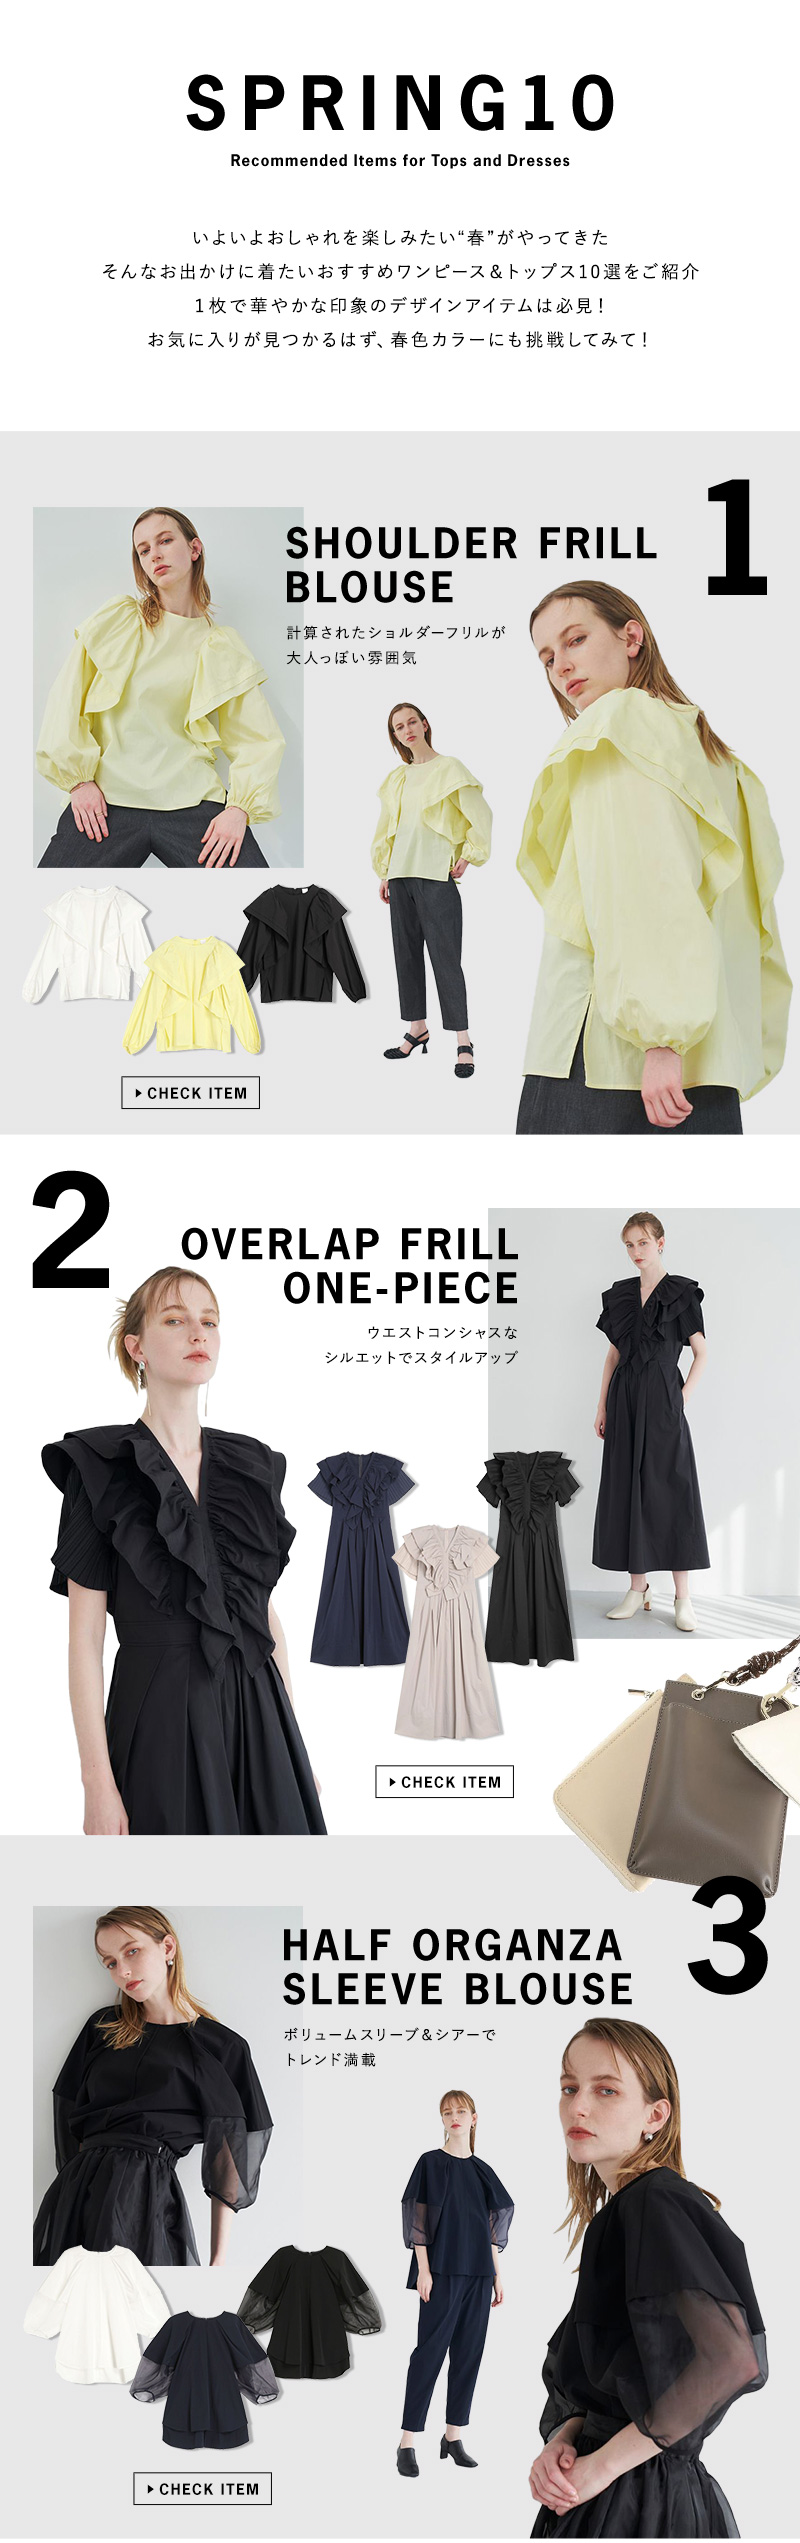 Recommended Items for Tops and Dresses